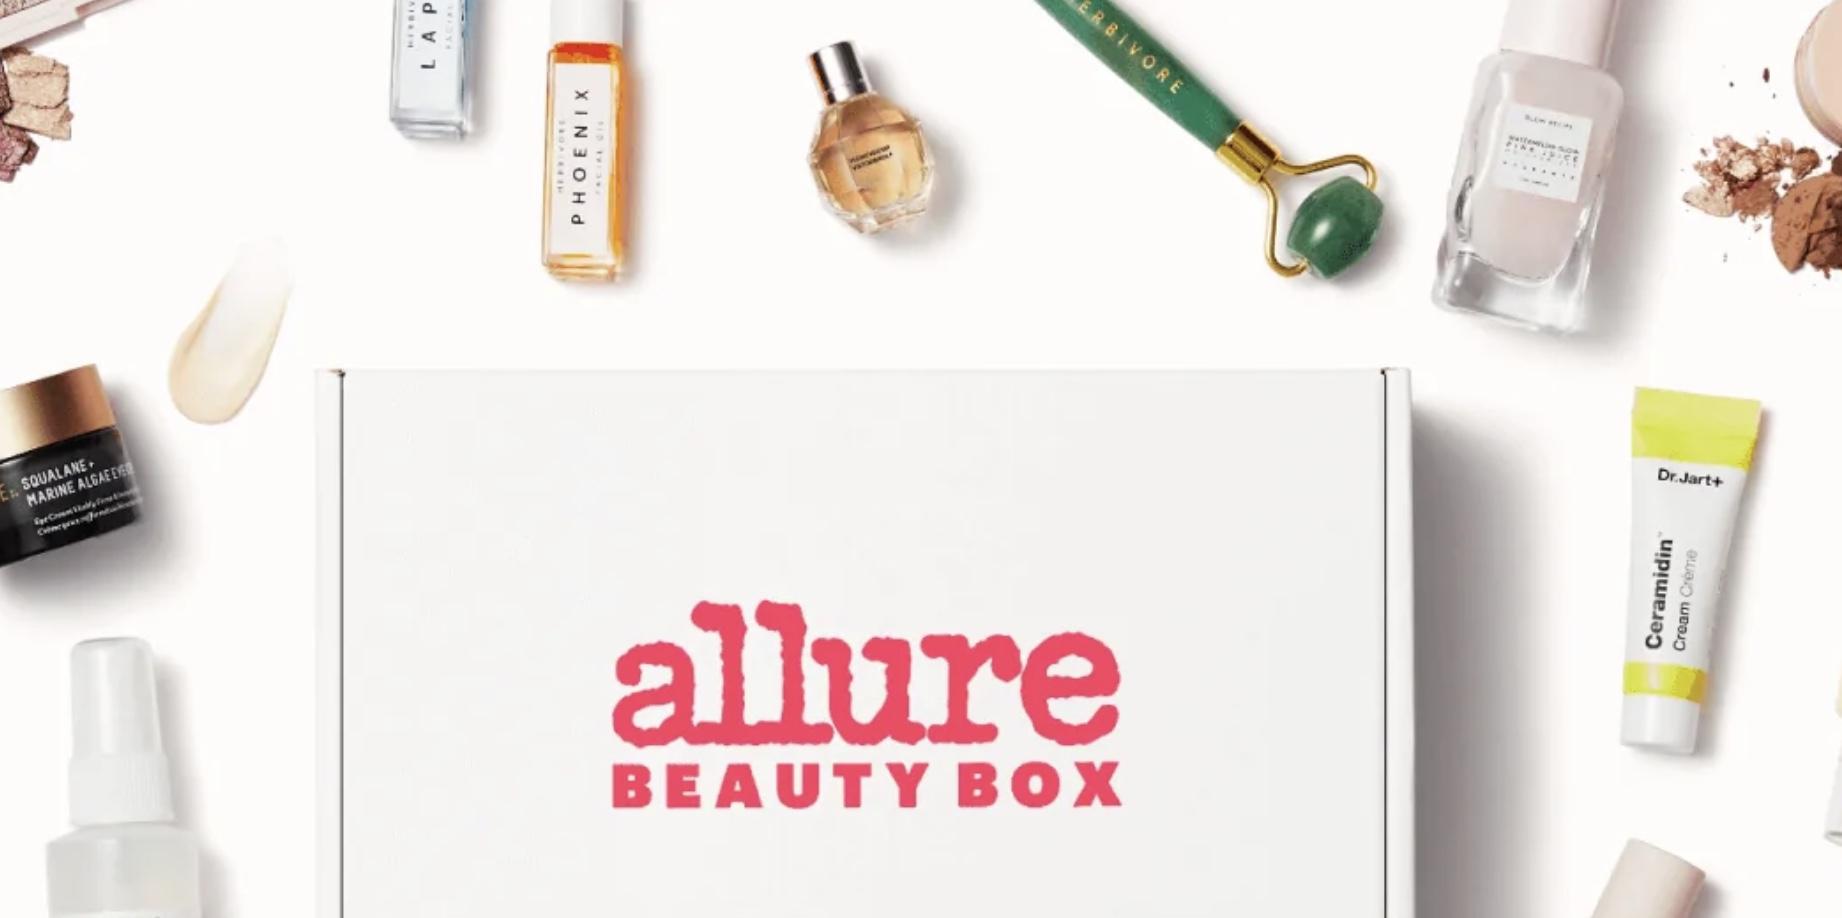 Allure Beauty Box – August 2022 Box – Full Spoilers + $13 First Box & TWO Free New Member Gifts